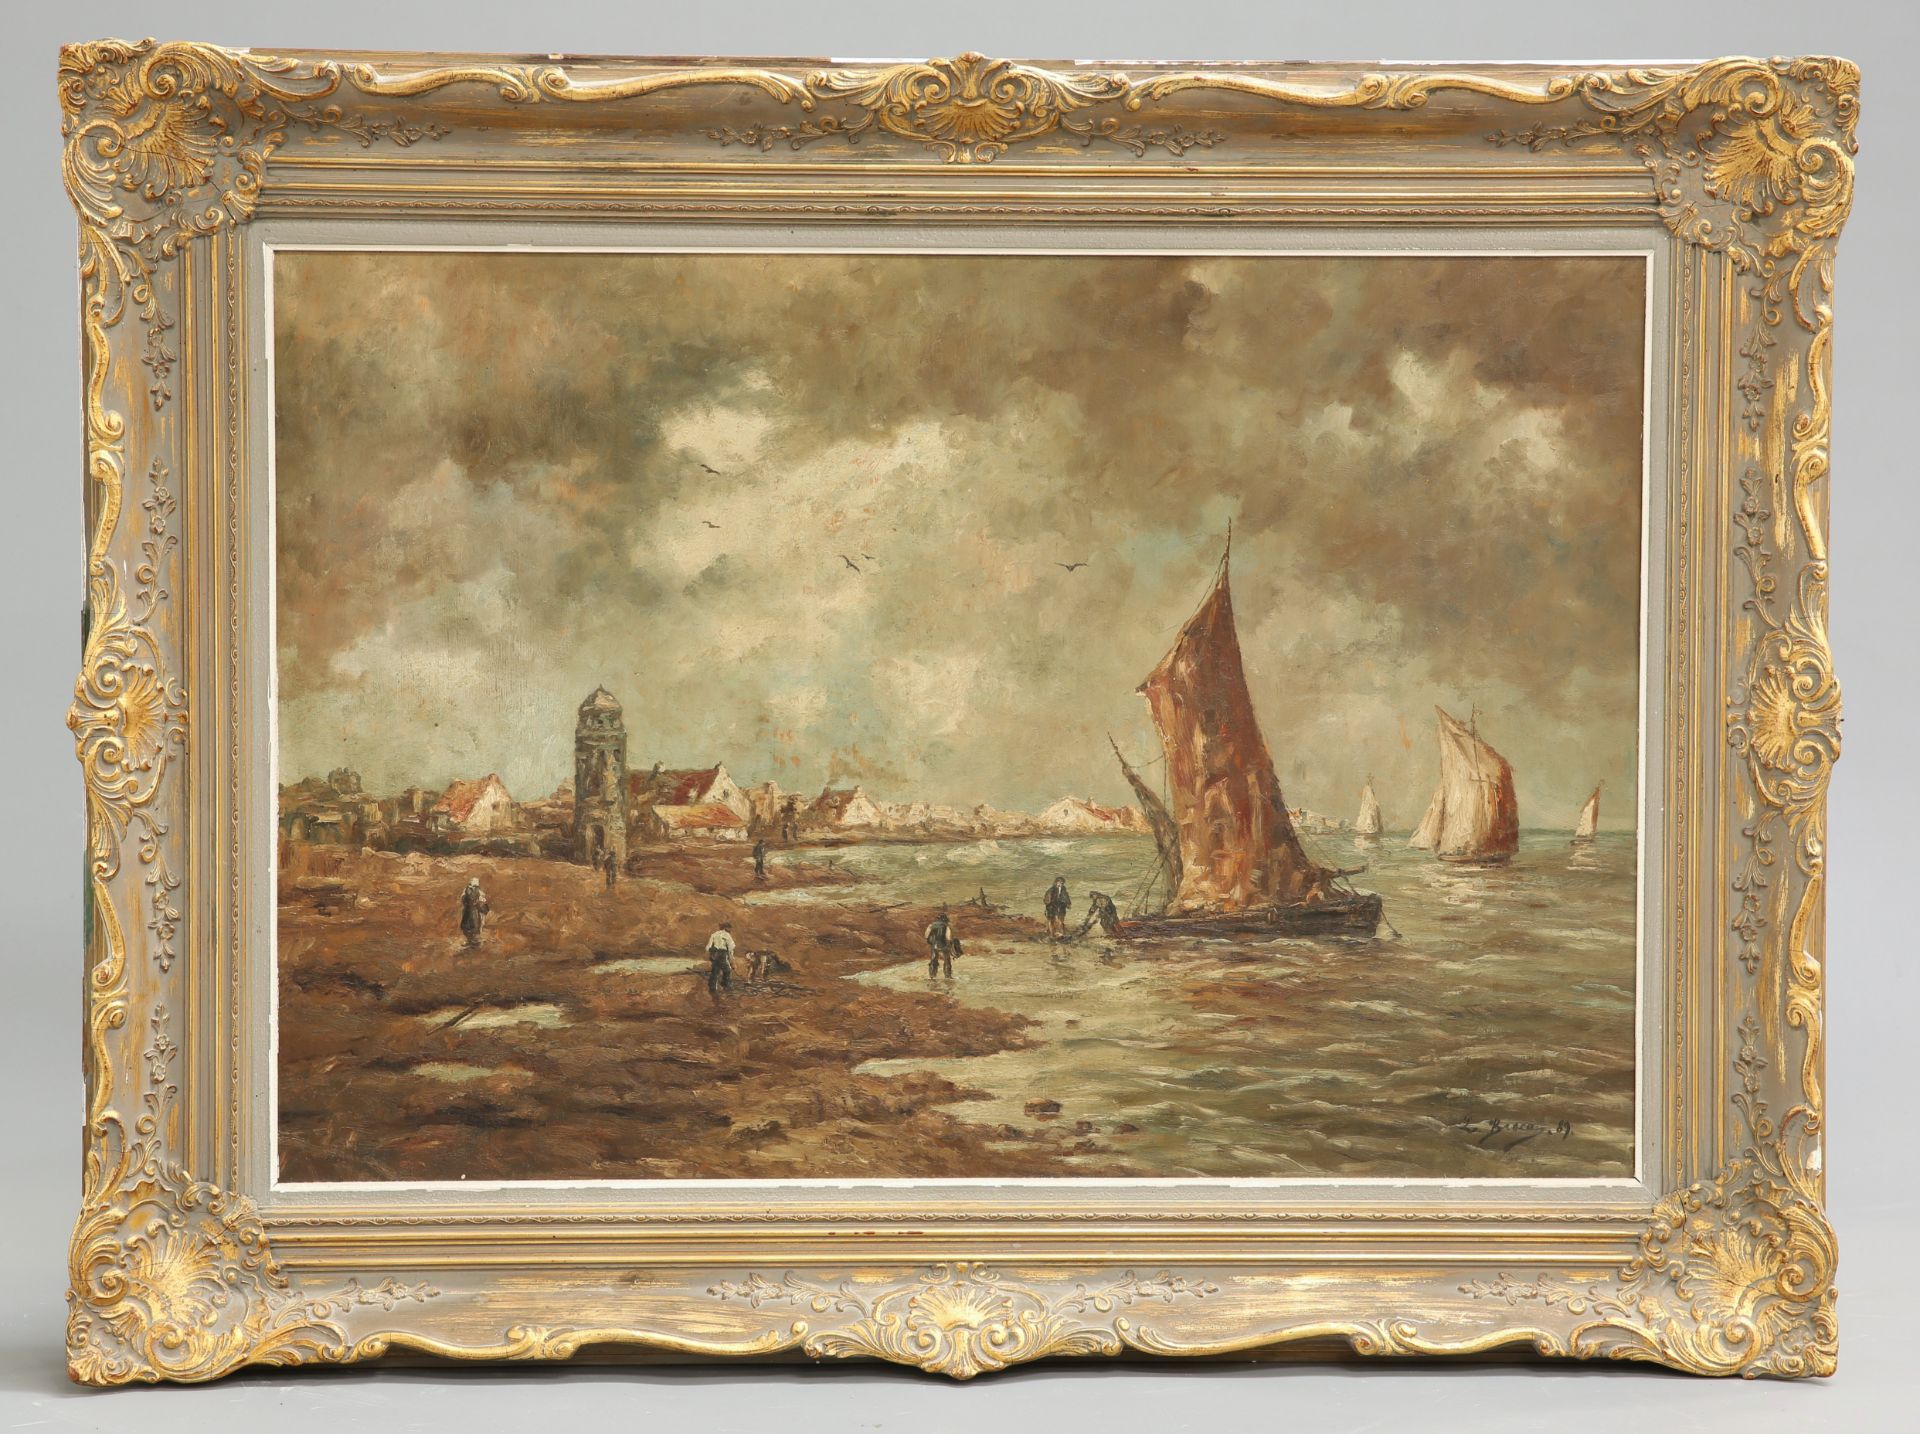 FLEMISH SCHOOL, FISHERMEN AND BOATS ON THE SHORE - Image 2 of 2